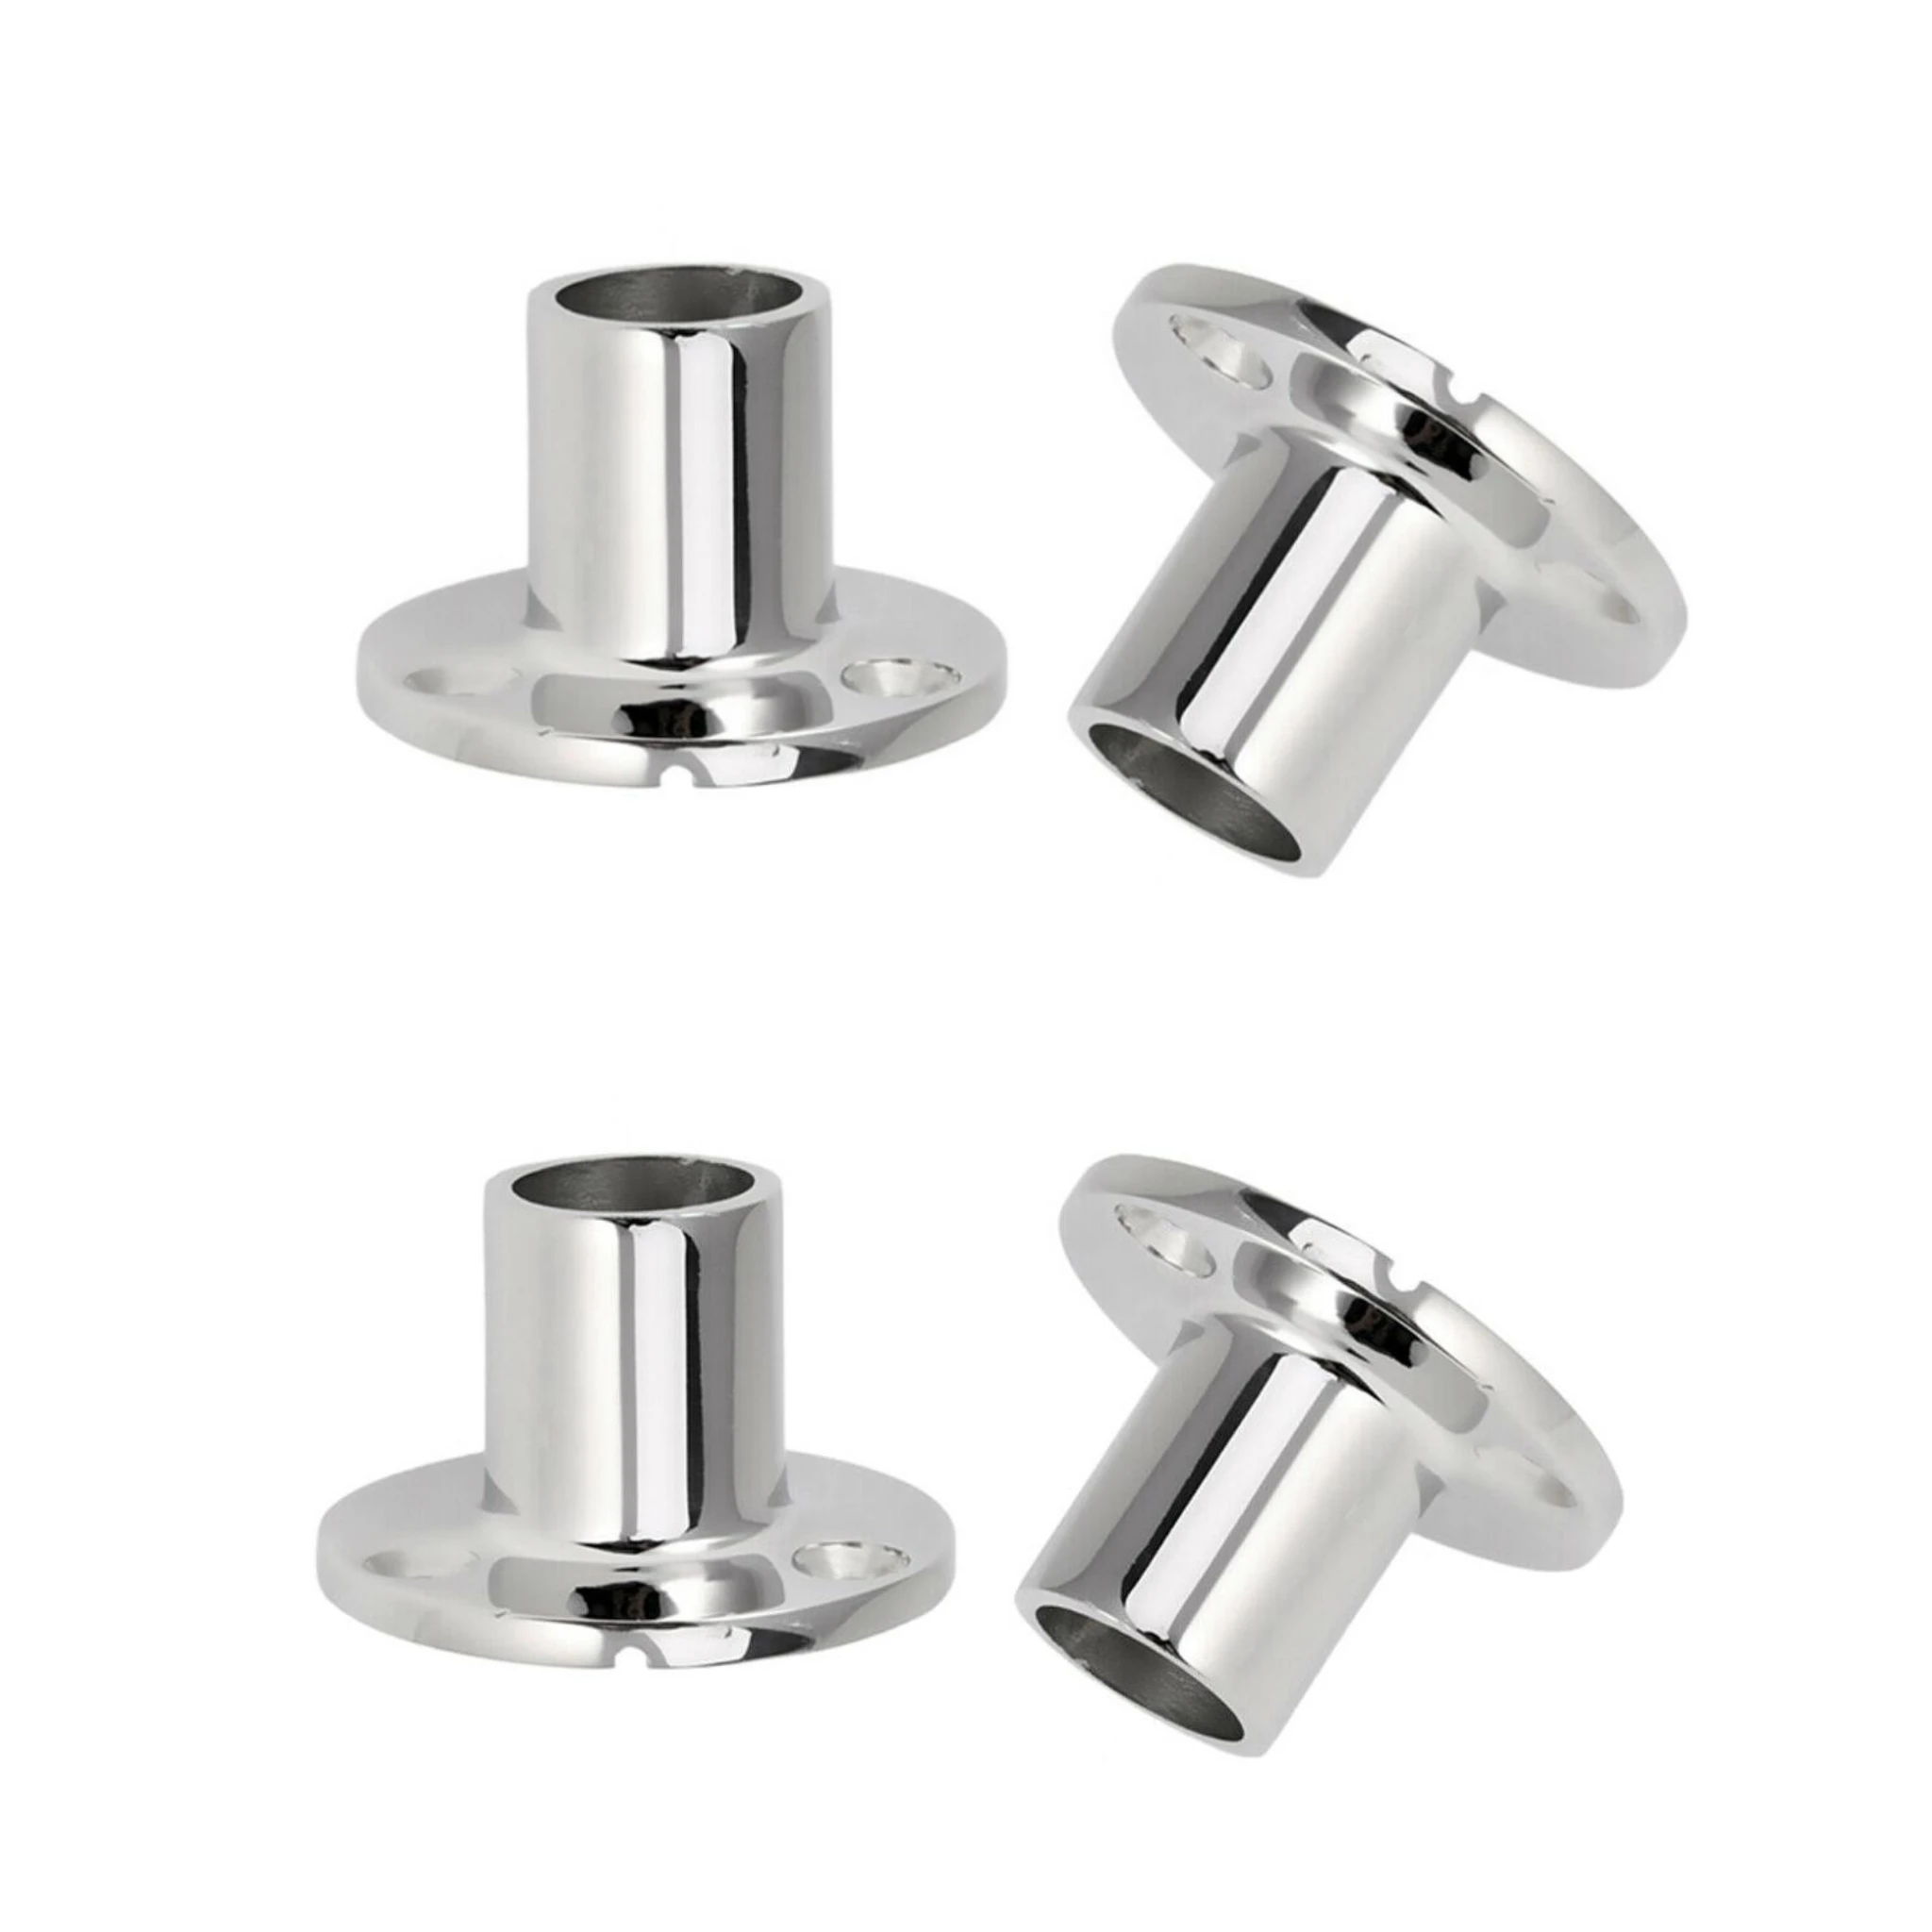 4X Boat Hand Rail Fittings 90 Degree 7/8" Round Base Marine Stainless Steel Fine